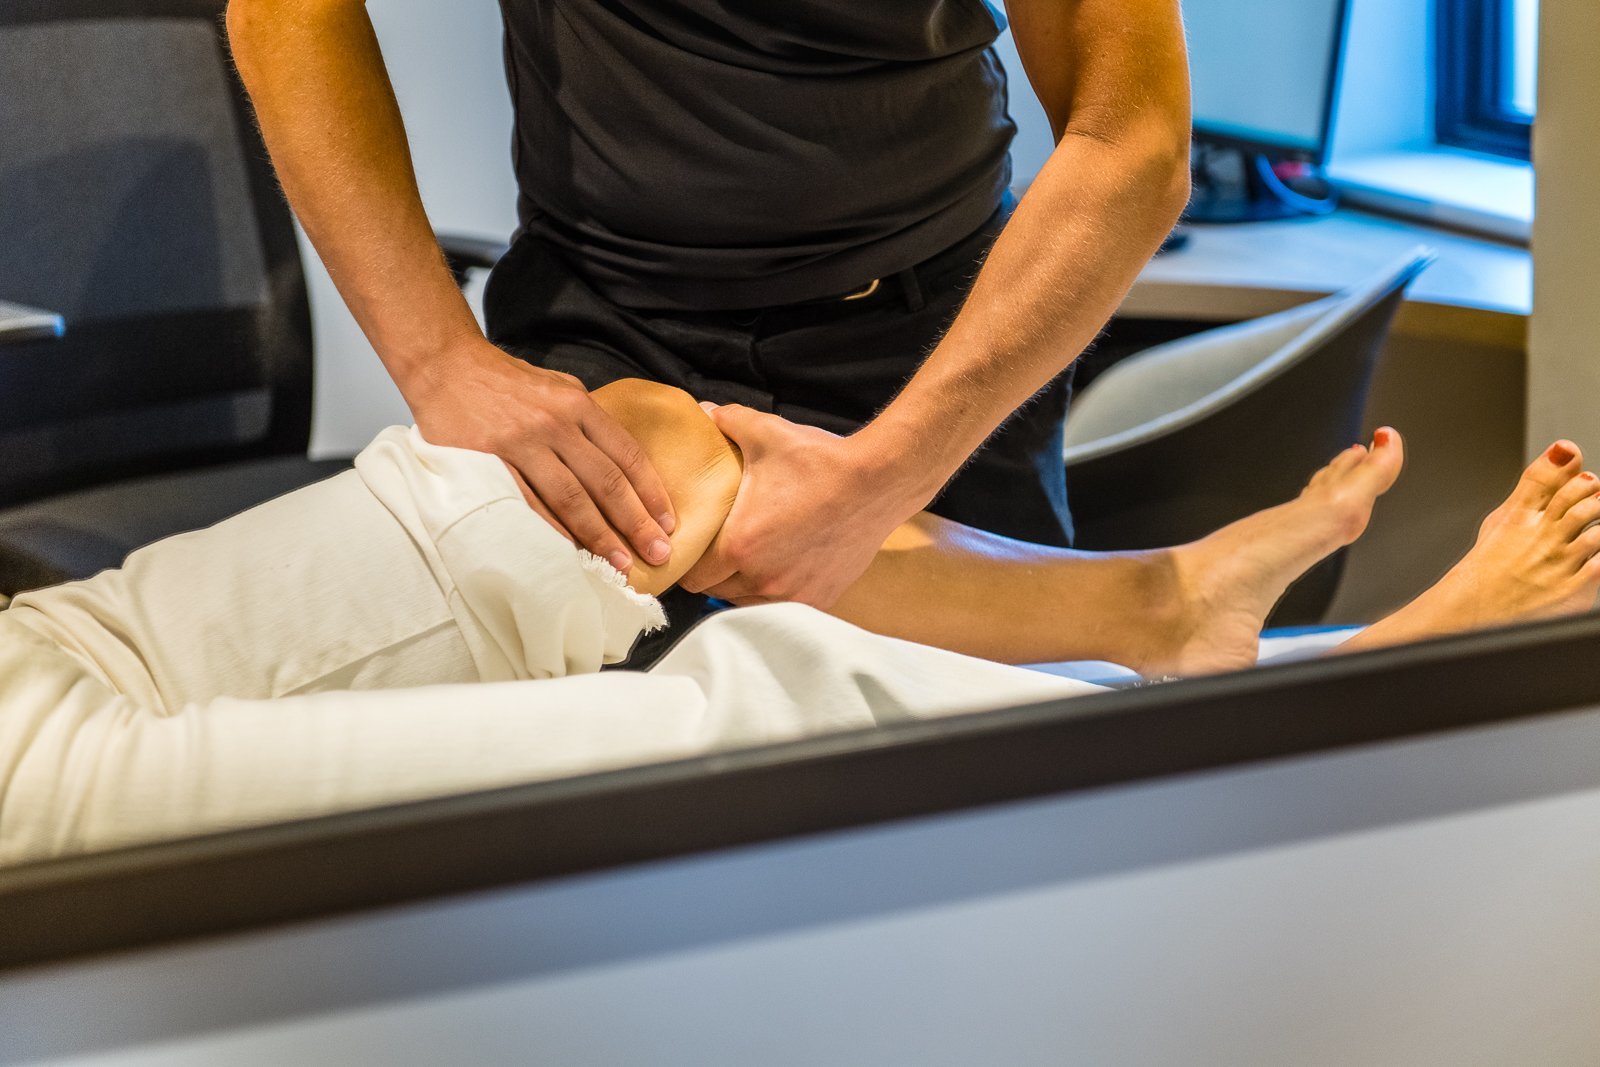 Is sports therapy the same as physical therapy?